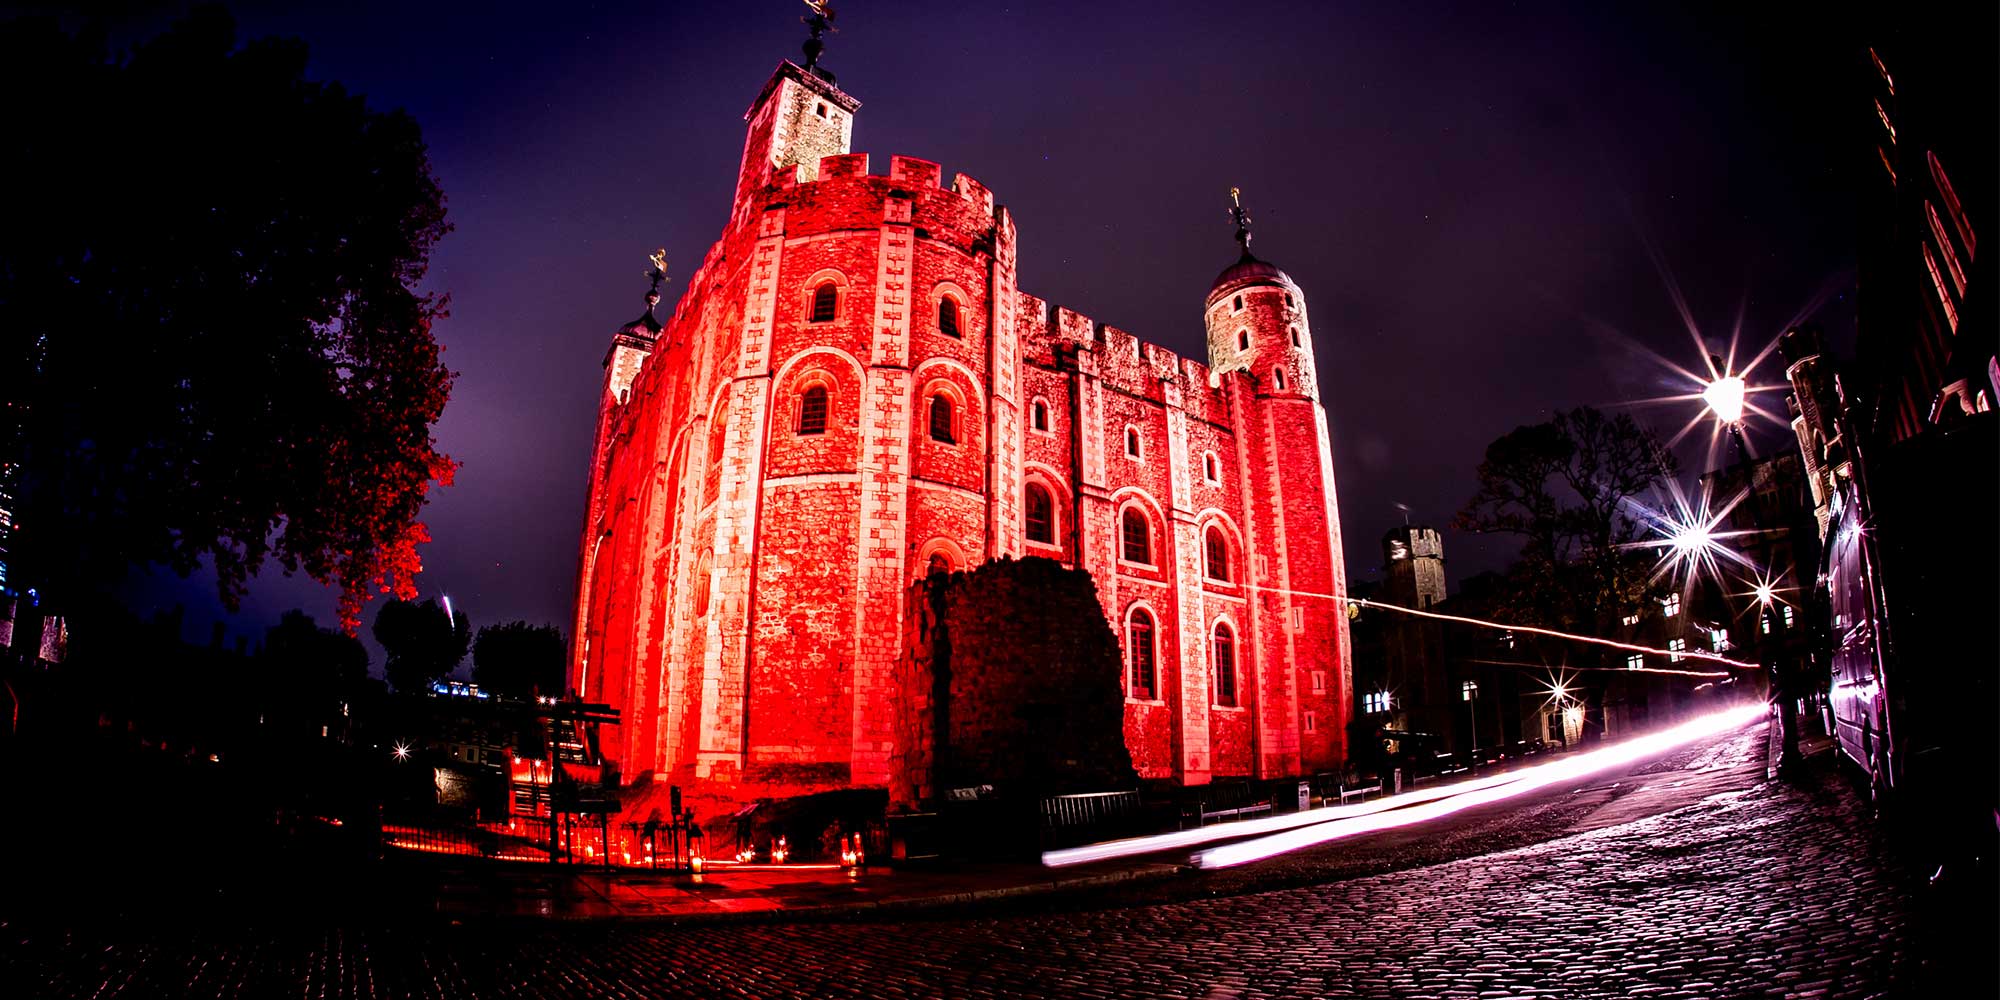 Hayfin Investor Corporate Dinner at Tower of London